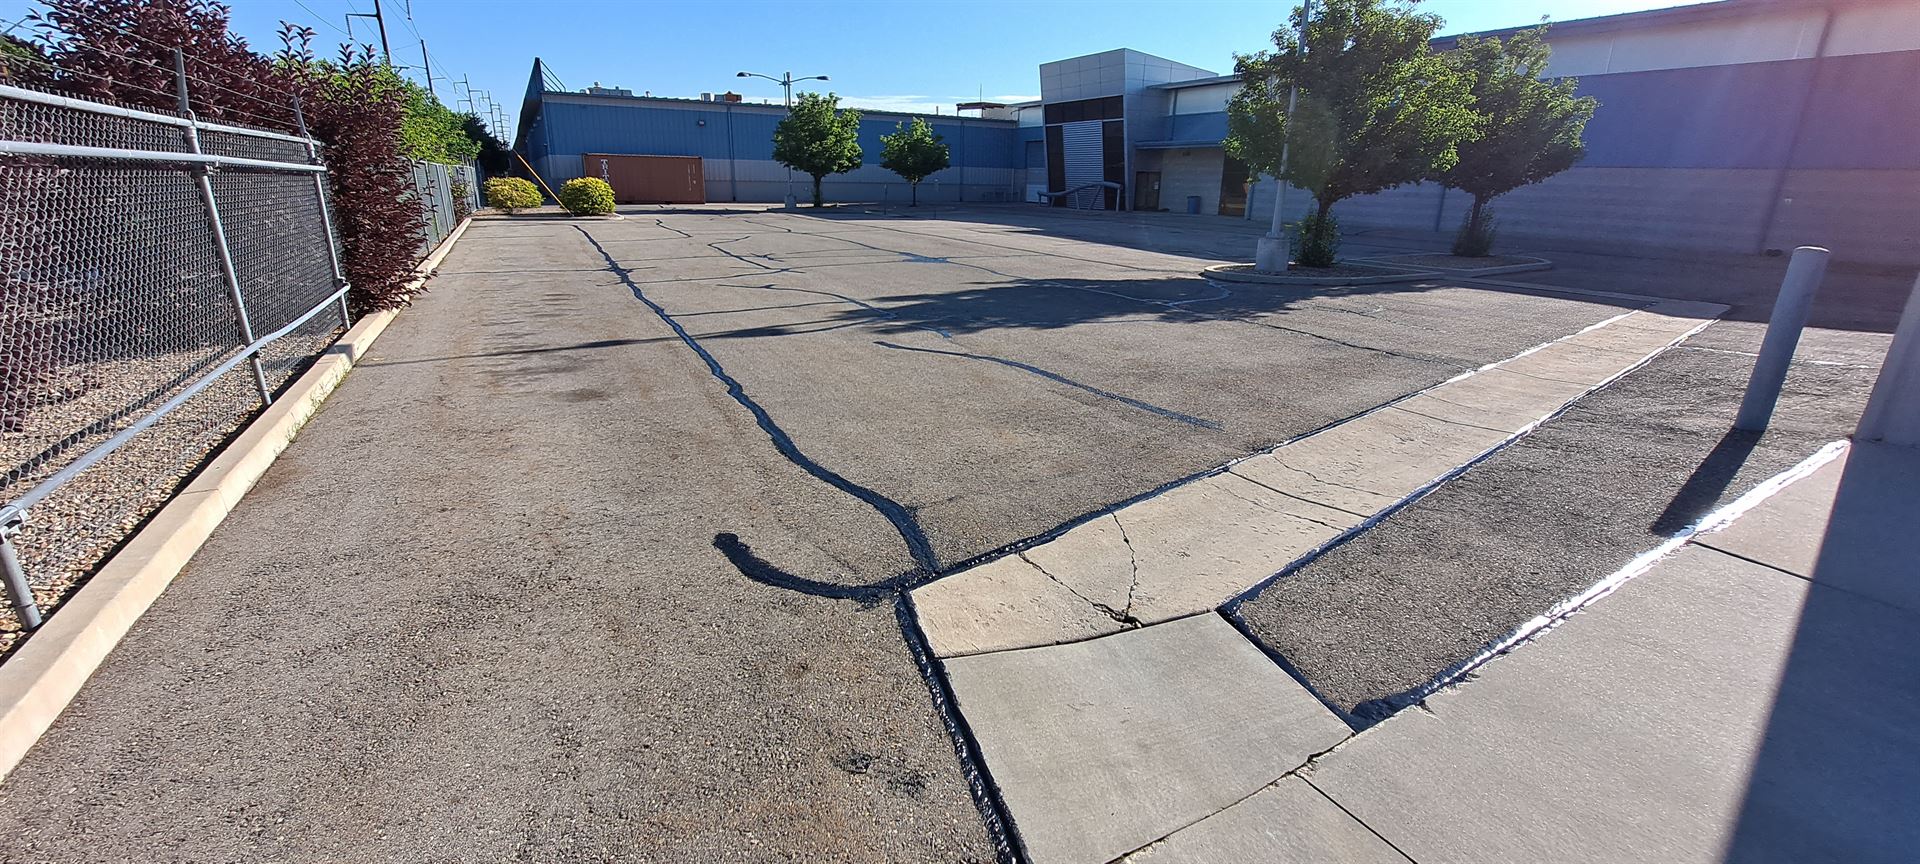 crack sealing in a parking lot